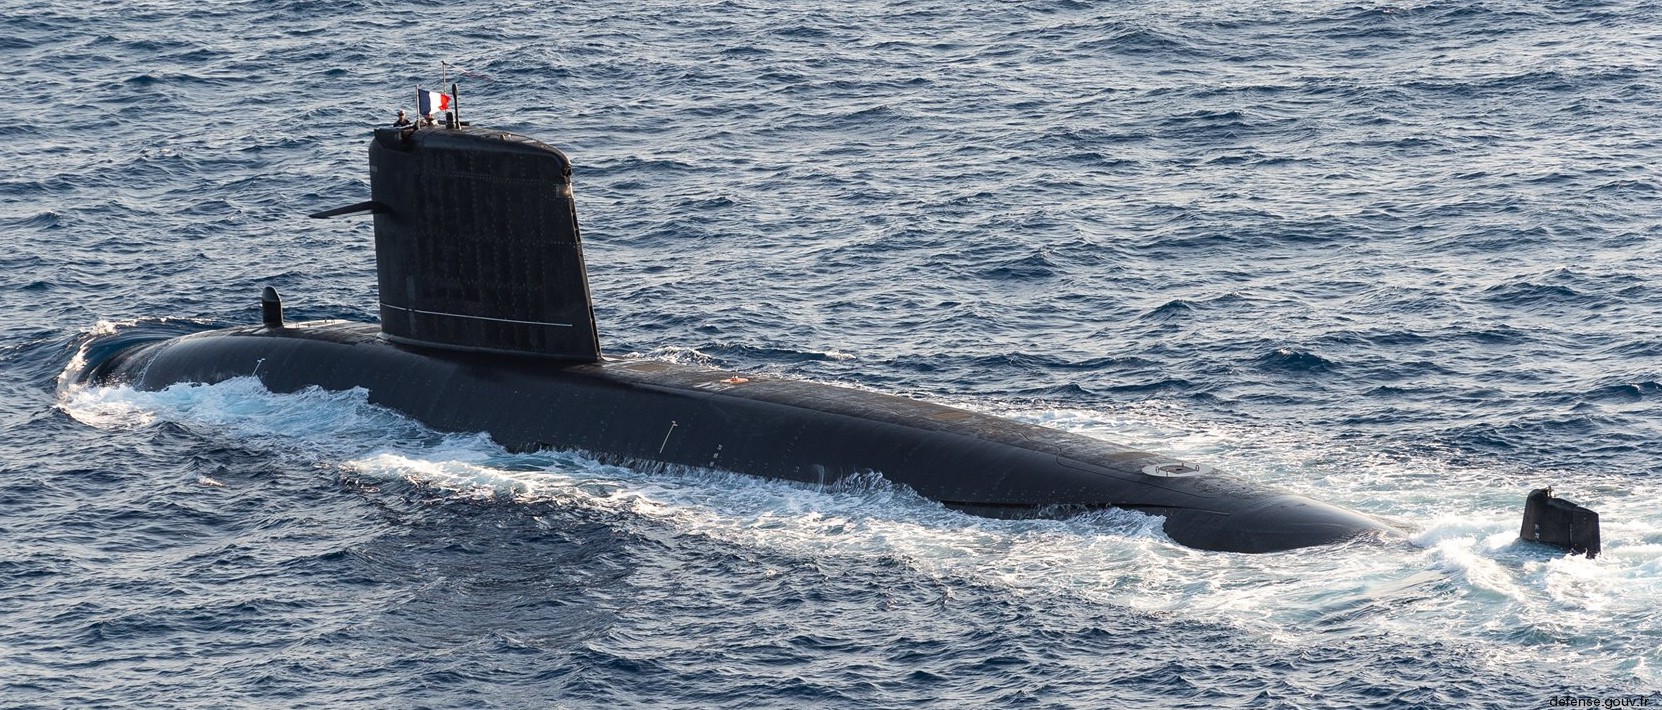 rubis class attack submarine ssn french navy marine nationale sna sous-marin nucleaire d'attaque 14